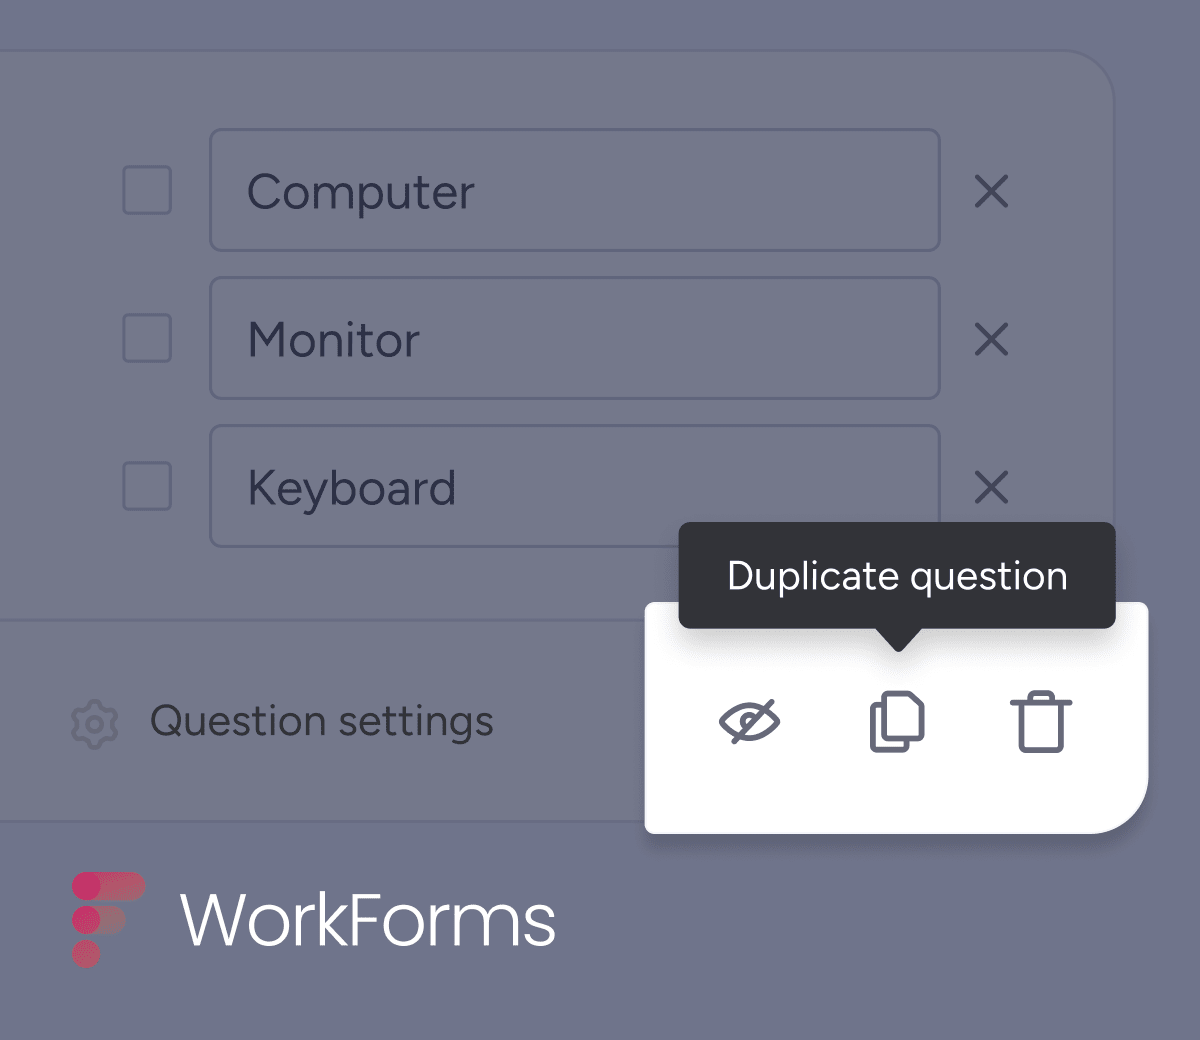 WorkForms new duplicate question feature